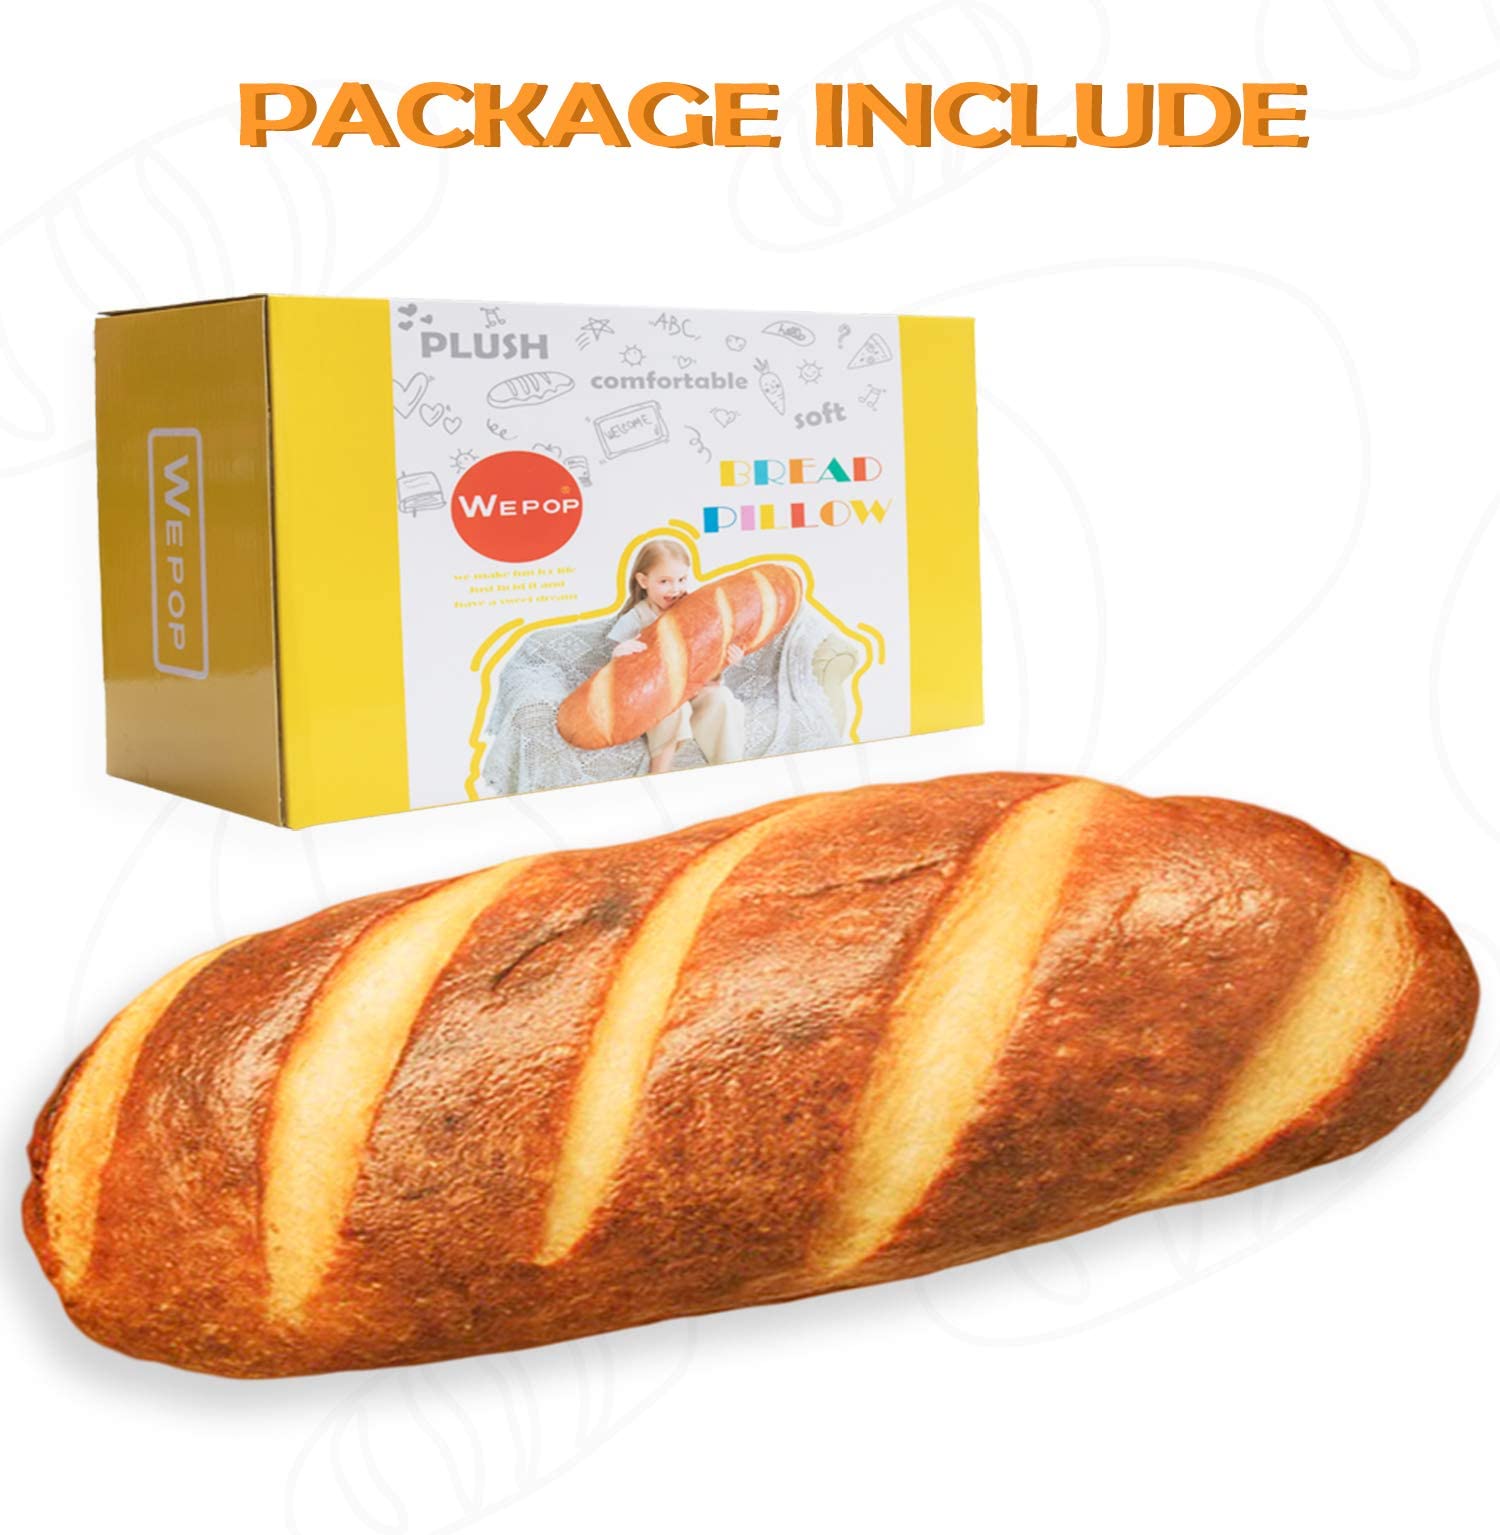 40 in 3D Simulation Bread Shape Pillow Soft Lumbar Baguette Back Cushion Funny Food Plush Stuffed Toy